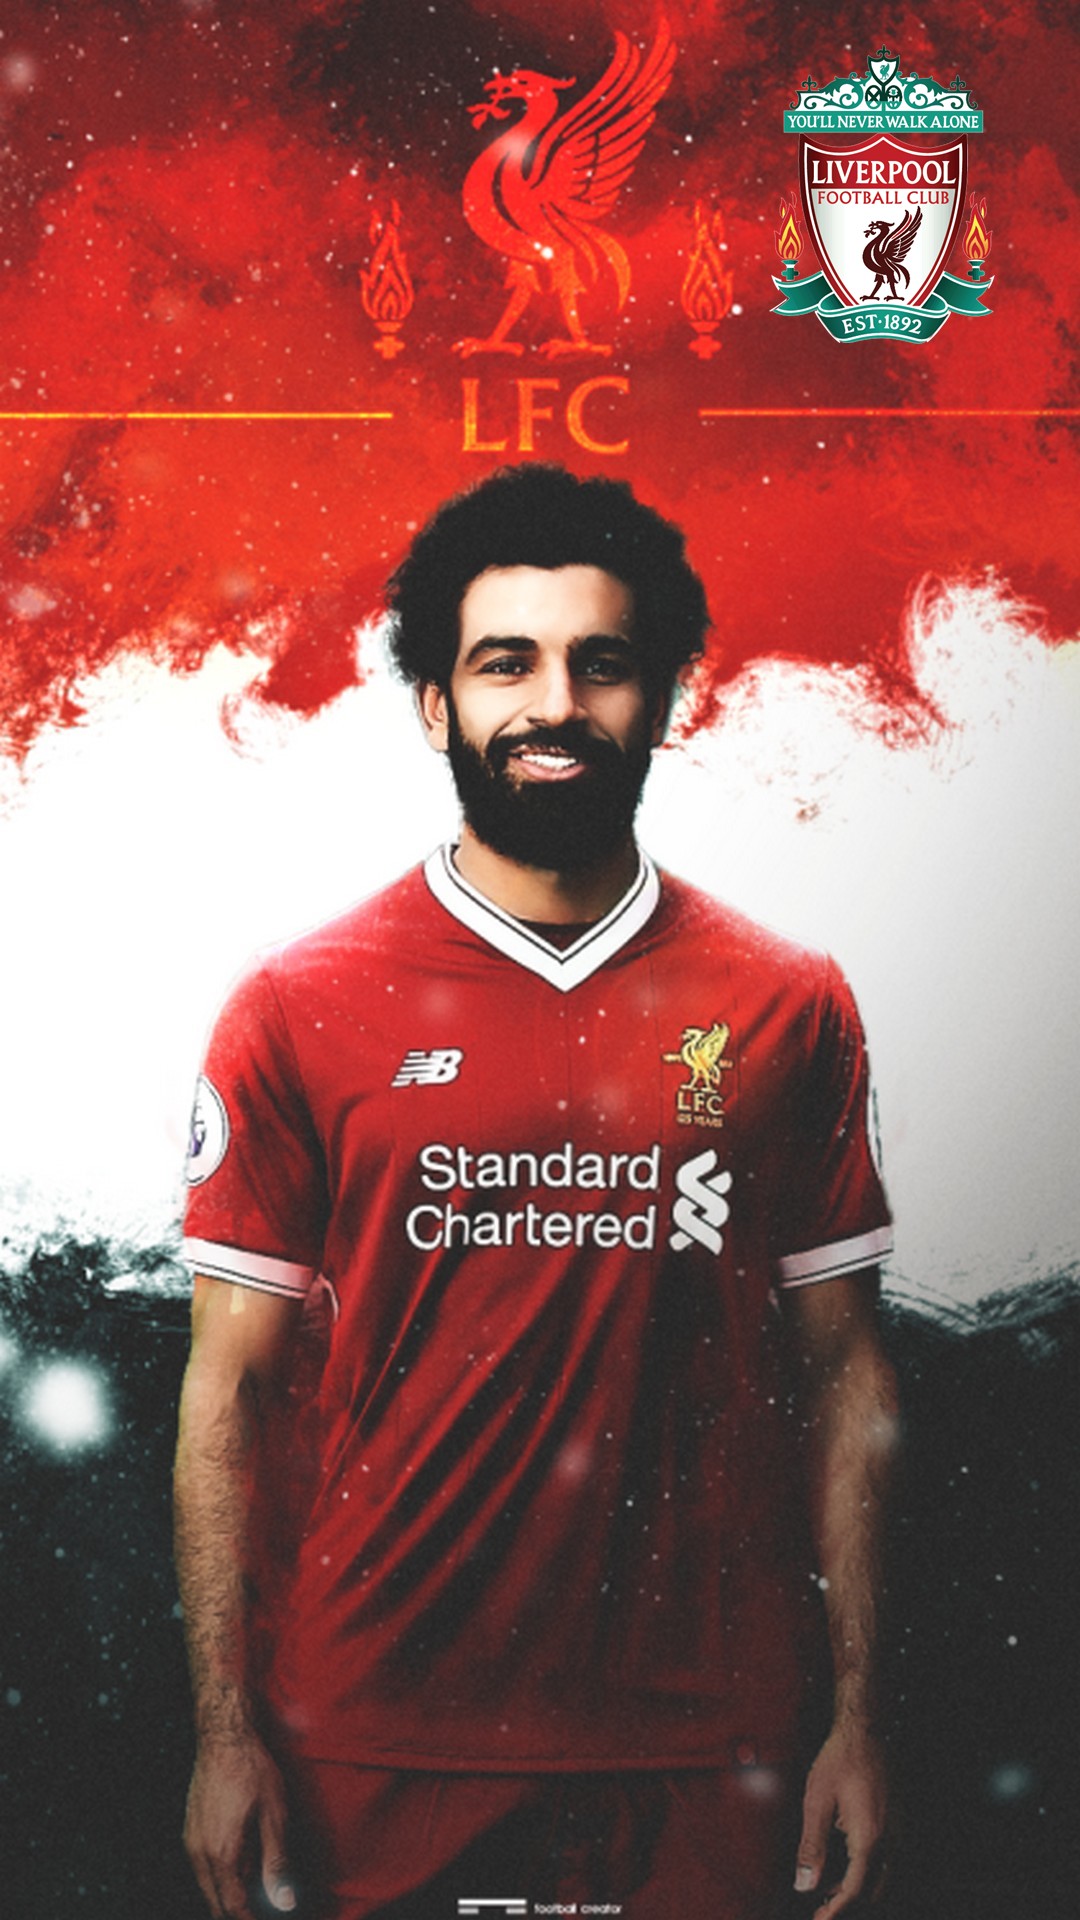 Android Wallpaper Salah Liverpool with image resolution 1080x1920 pixel. You can make this wallpaper for your Android backgrounds, Tablet, Smartphones Screensavers and Mobile Phone Lock Screen